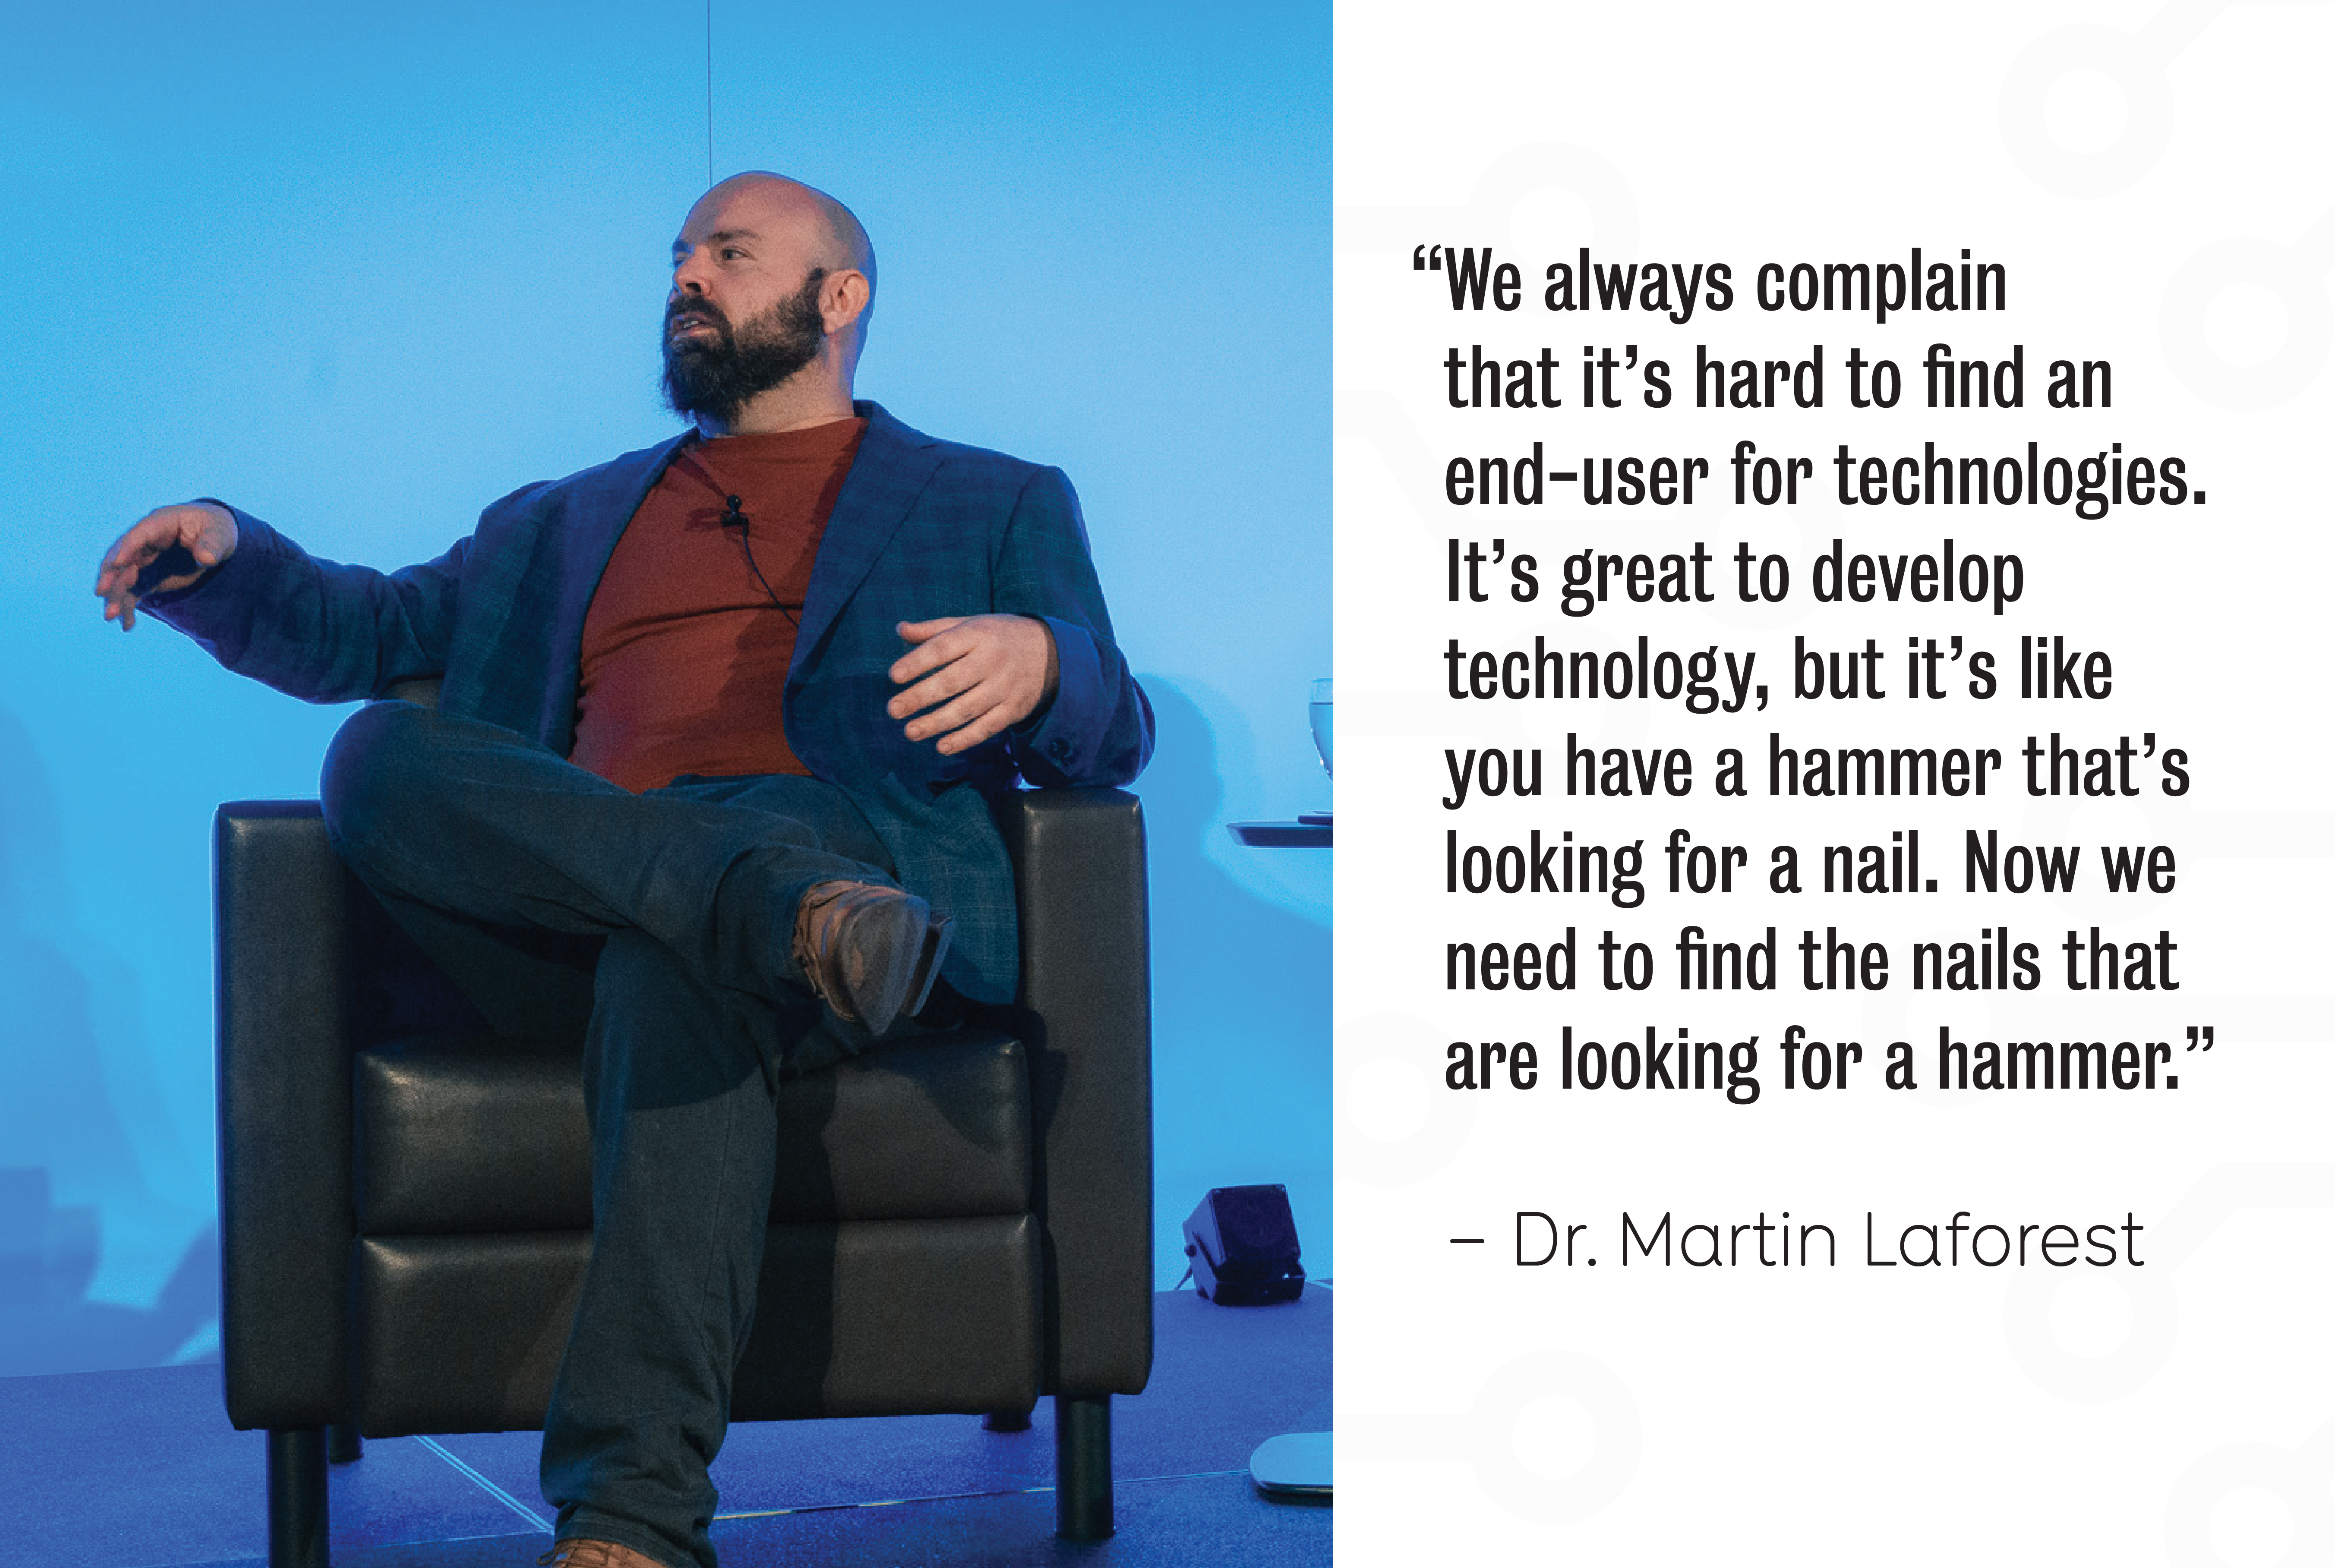 A photo of Martin Laforest with a quote: “We always complain that it’s hard to find an end-user for technologies. It’s great to develop technology, but it’s like you have a hammer that’s looking for a nail. Now we need to find the nails that are looking for a hammer.”